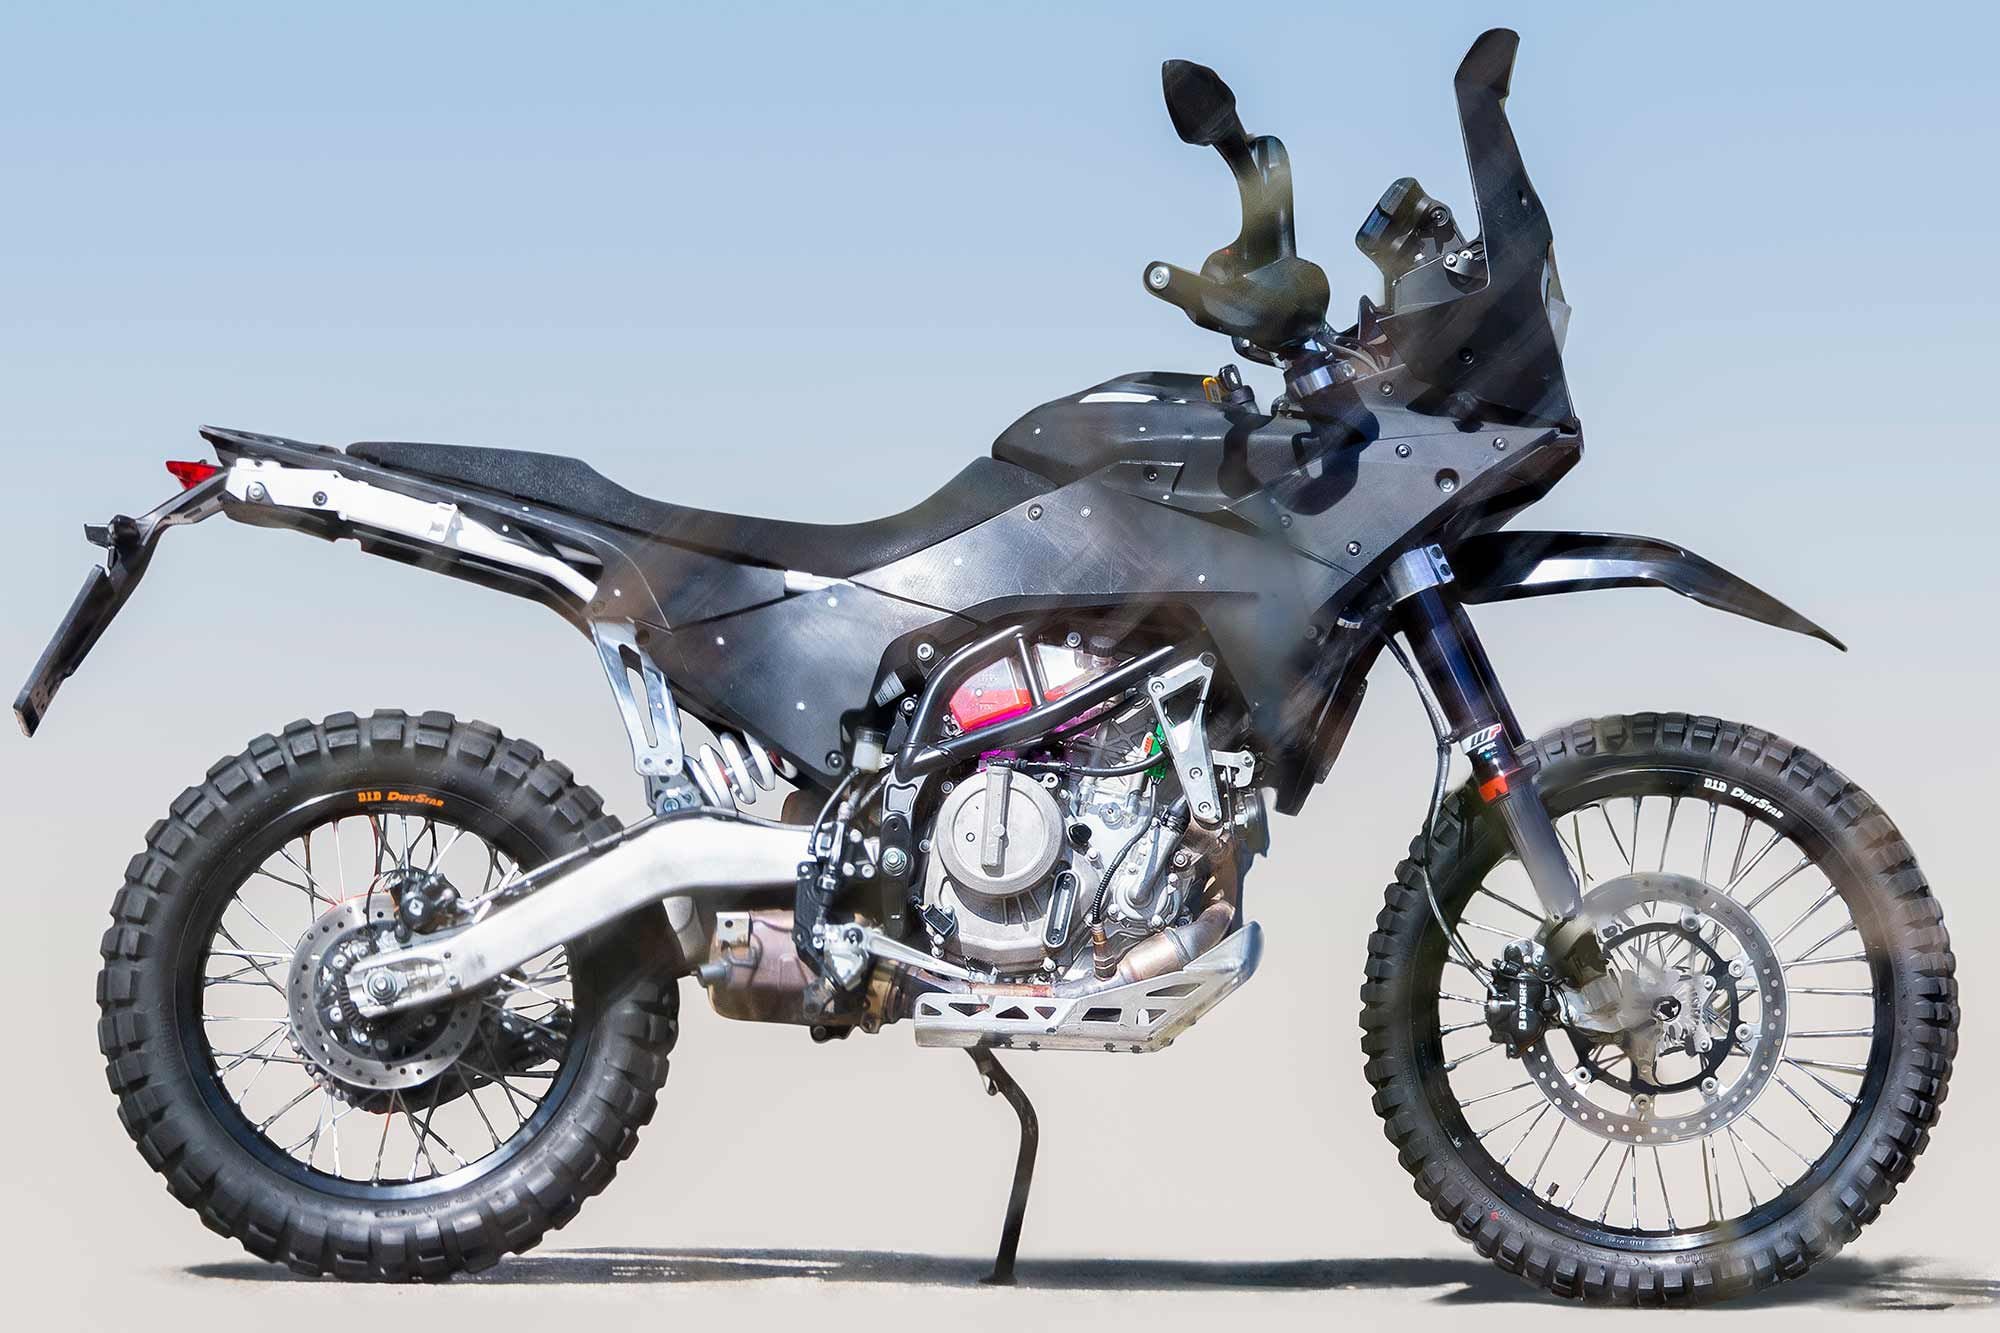 This spied version is what we believe is a next-generation 390 Adventure but in a more hardcore Rally version.